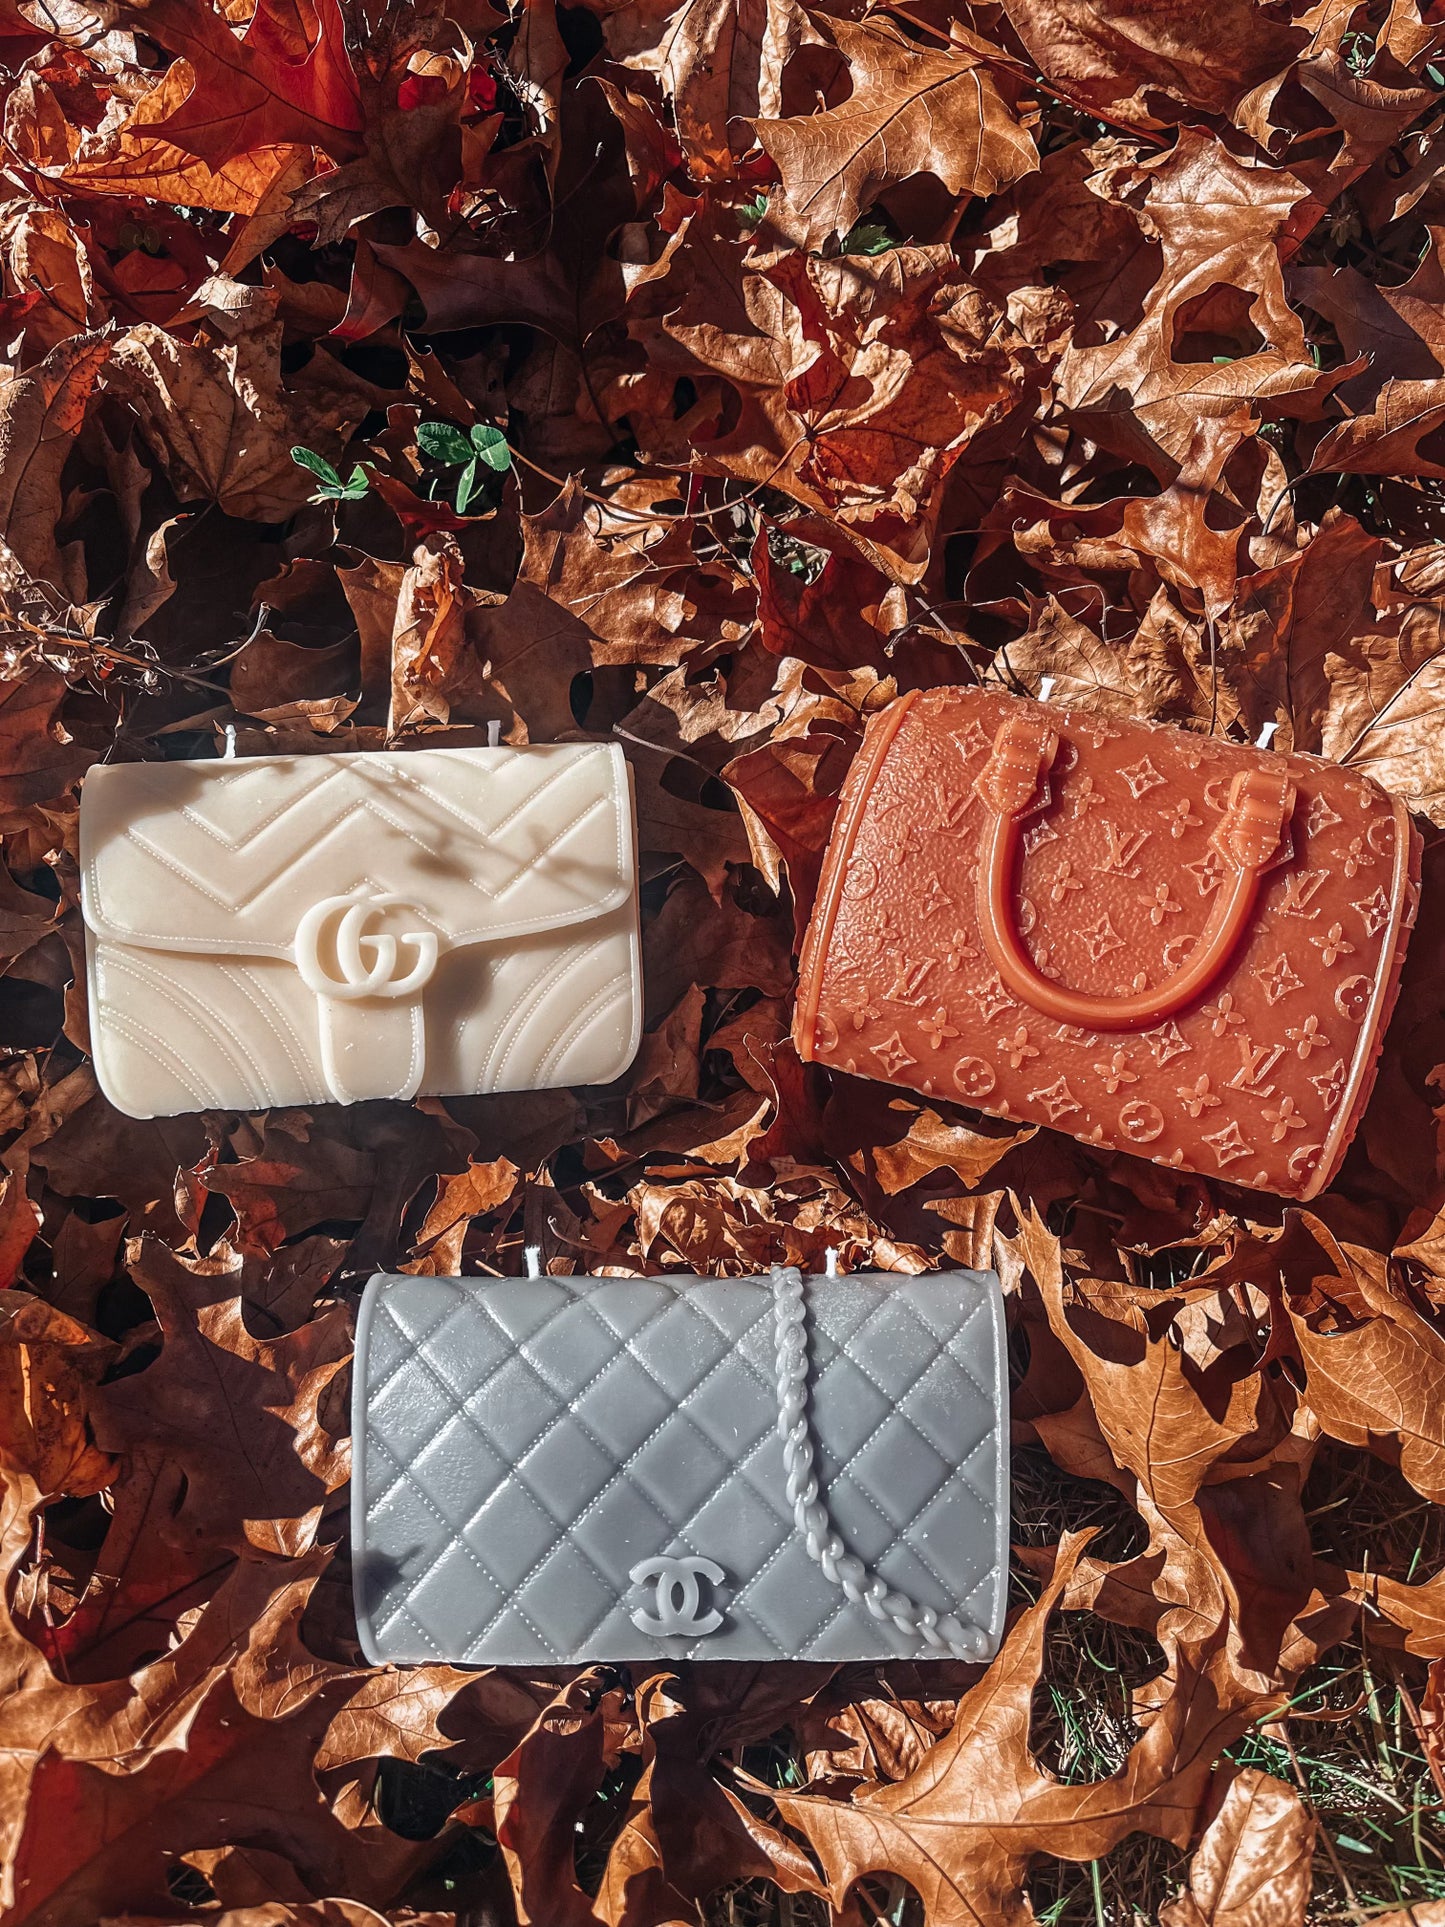 CHANEL VS. GUCCI  Chanel, Gucci, How to find out